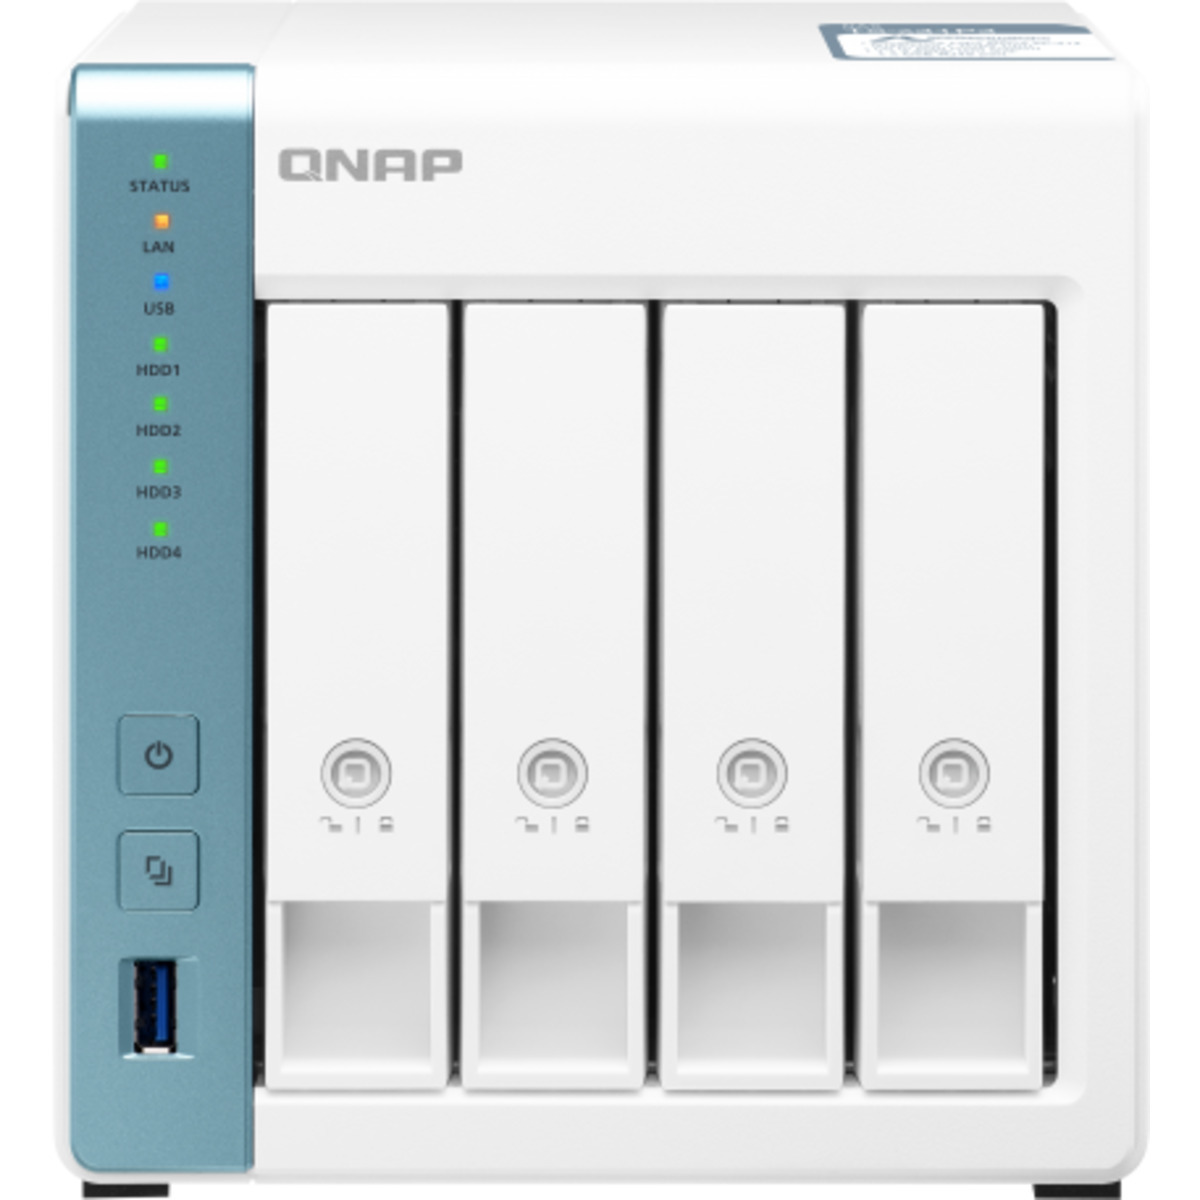 buy $978 QNAP TS-431P3 4tb Desktop NAS - Network Attached Storage Device 4x1000gb Samsung 870 QVO MZ-77Q1T0 2.5 SATA 6Gb/s SSD CONSUMER Class Drives Installed - Burn-In Tested - FREE RAM UPGRADE - nas headquarters buy network attached storage server device das new raid-5 free shipping usa TS-431P3